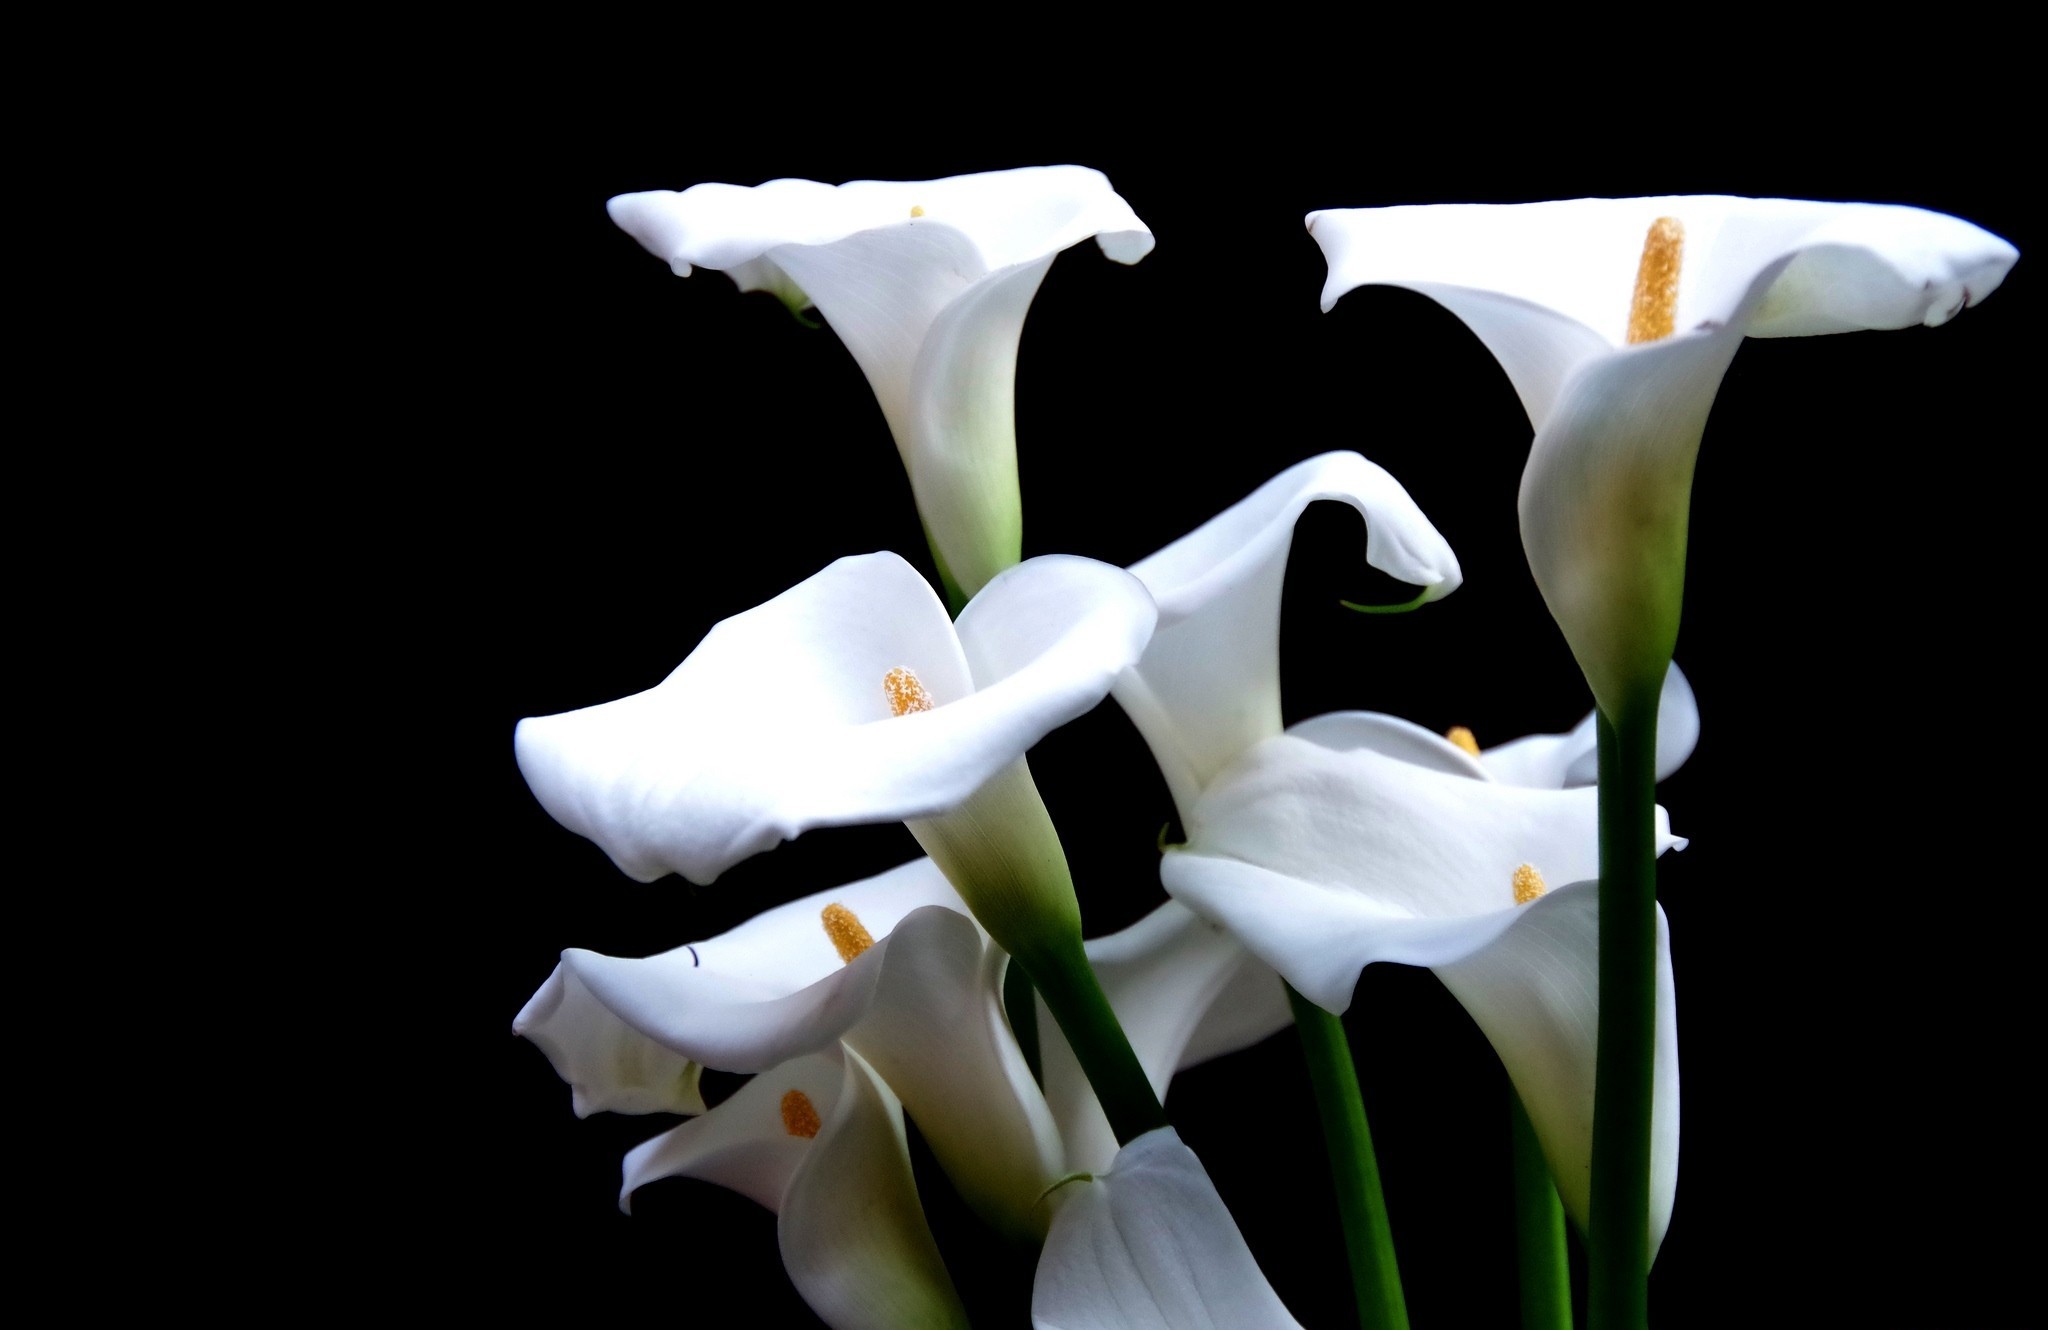 earth, calla lily, calla, flower, lily, flowers